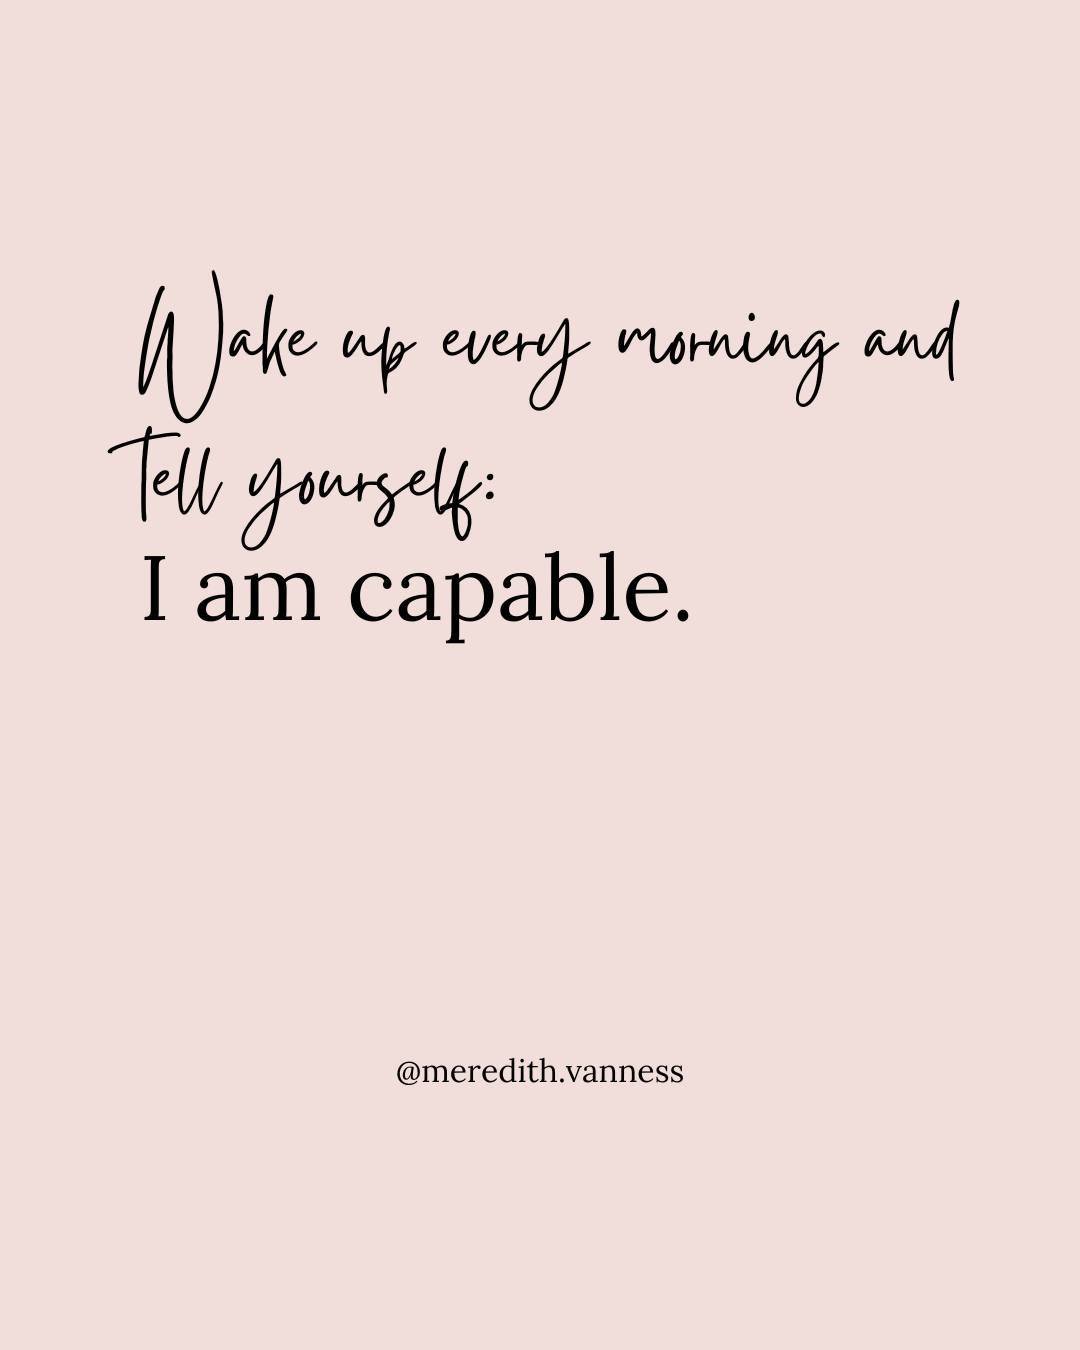 I mean..... seriously, who does not need this reminder from time to time or every morning? ⁠
⁠
Mantras or affirmations are quick statements that we say to ourselves that can set the tone for the whole day. Try it and see what happens. ⁠
⁠
&quot; I am